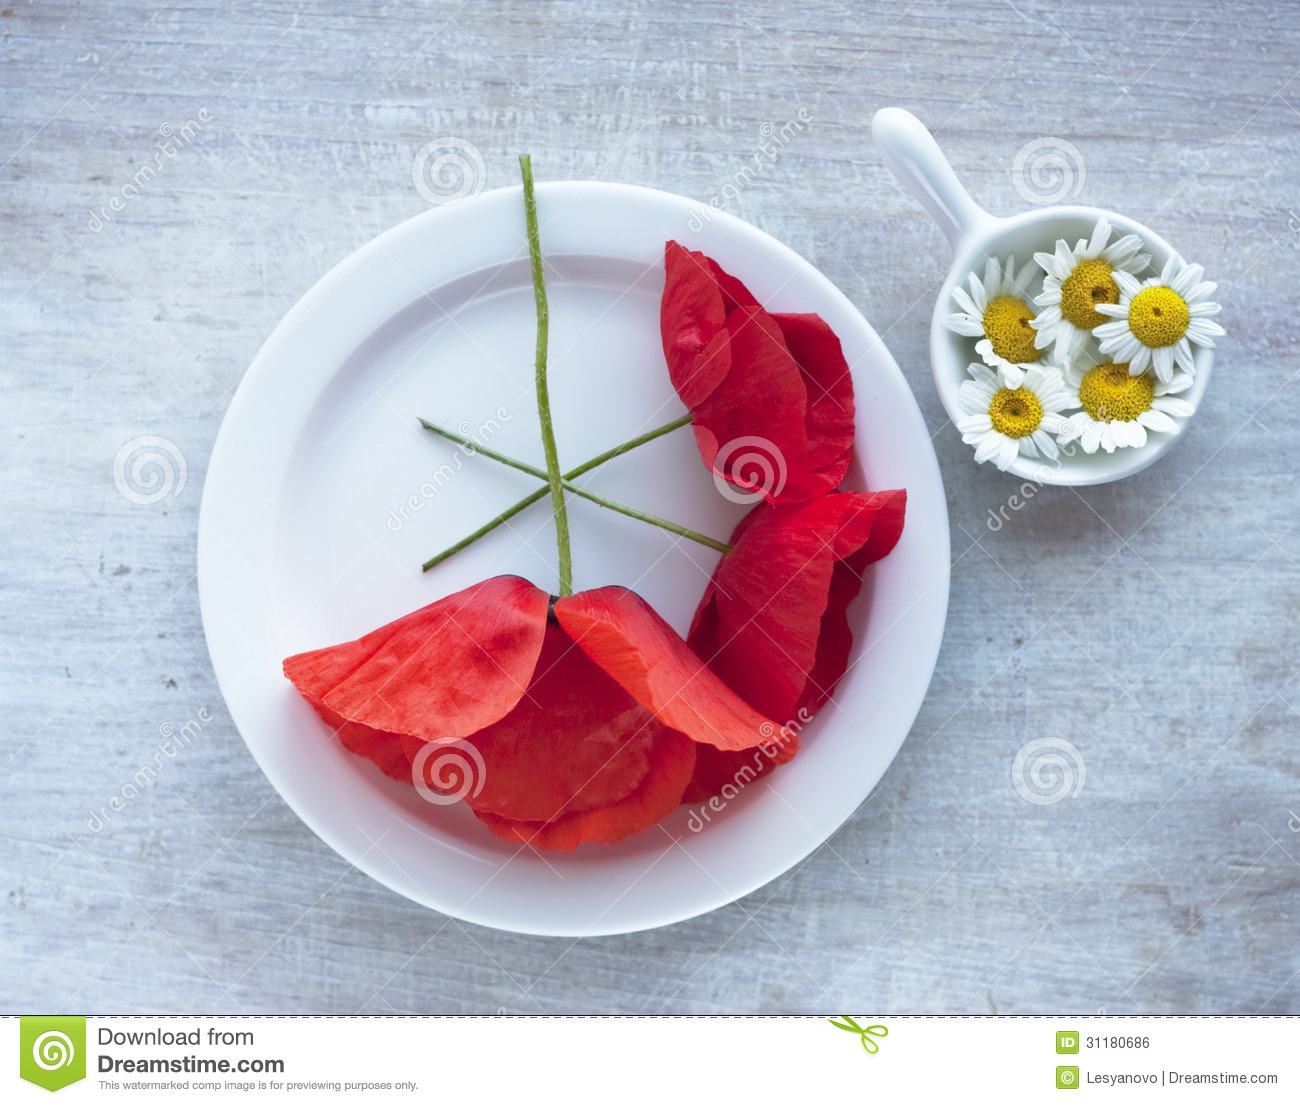     Stock Image  Camomile And Poppy In The Small Plate On The China Dishes